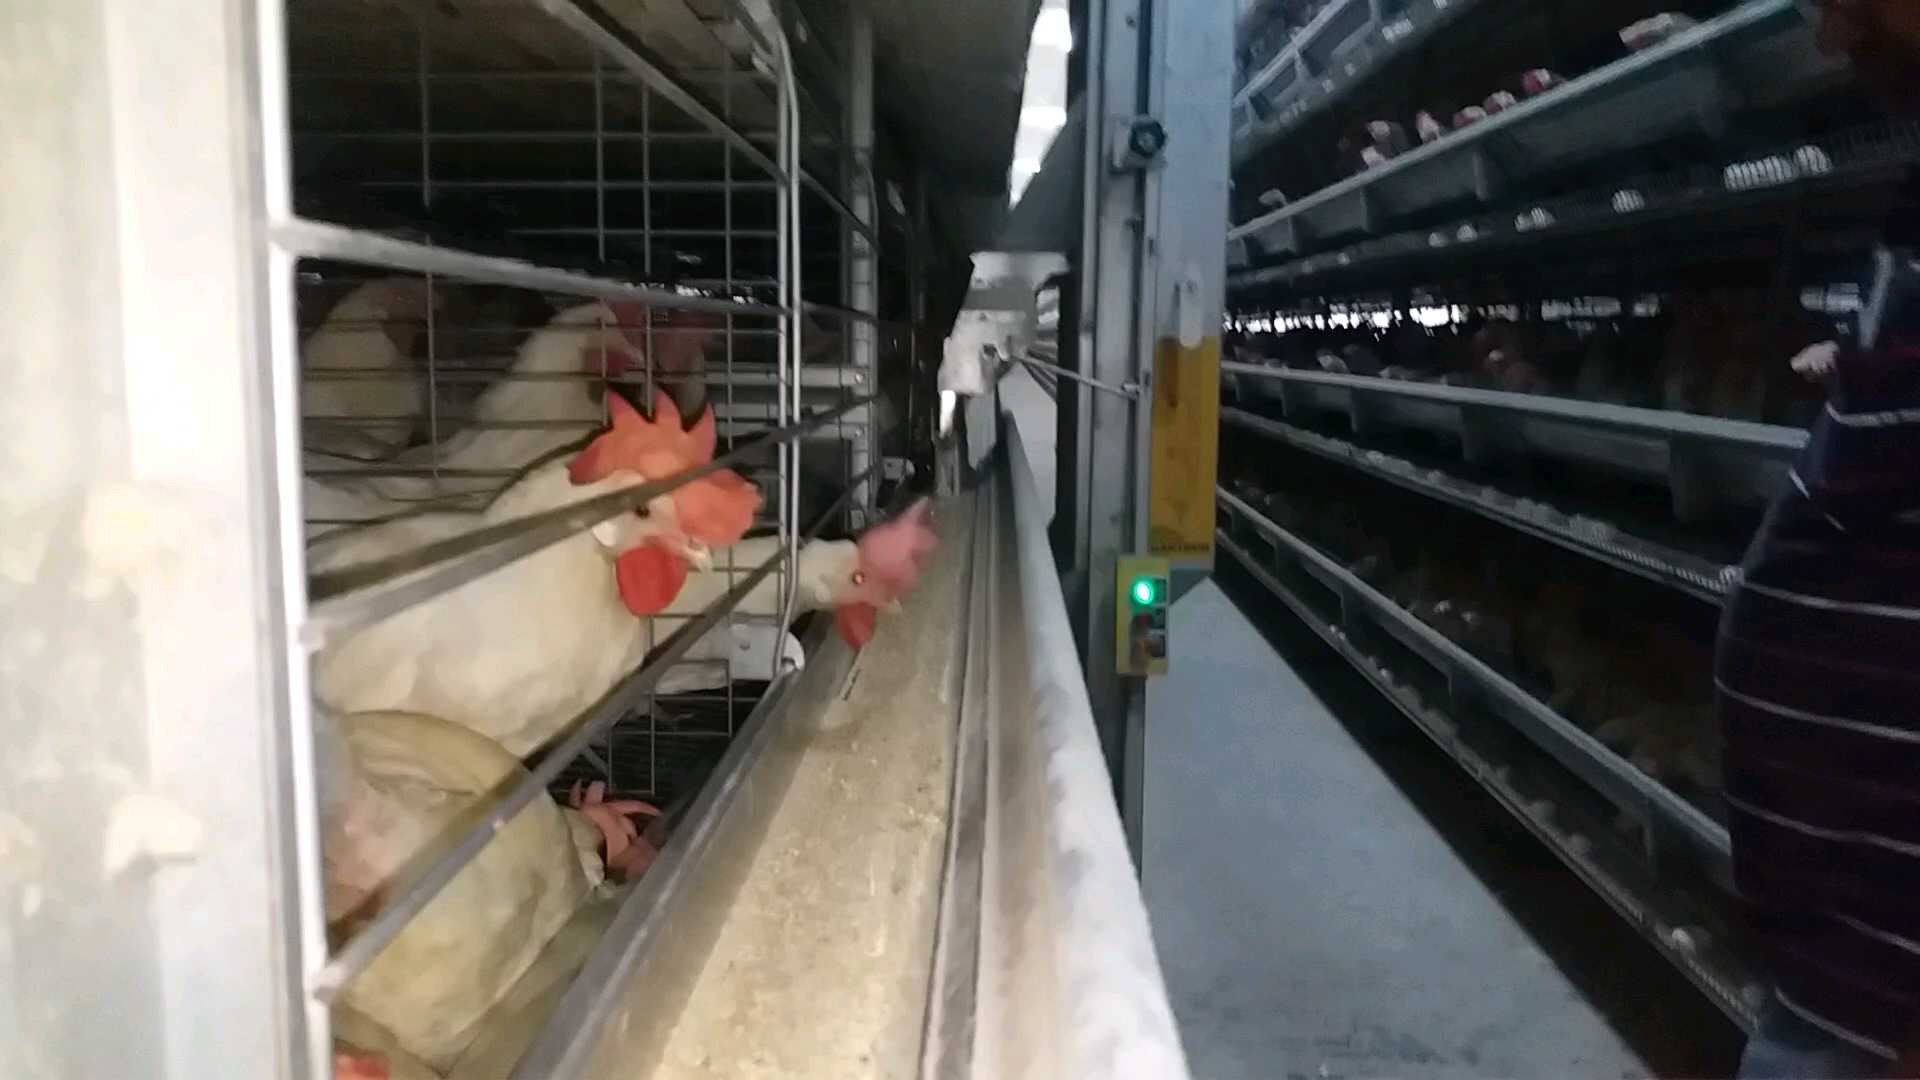 modern poultry farm in india